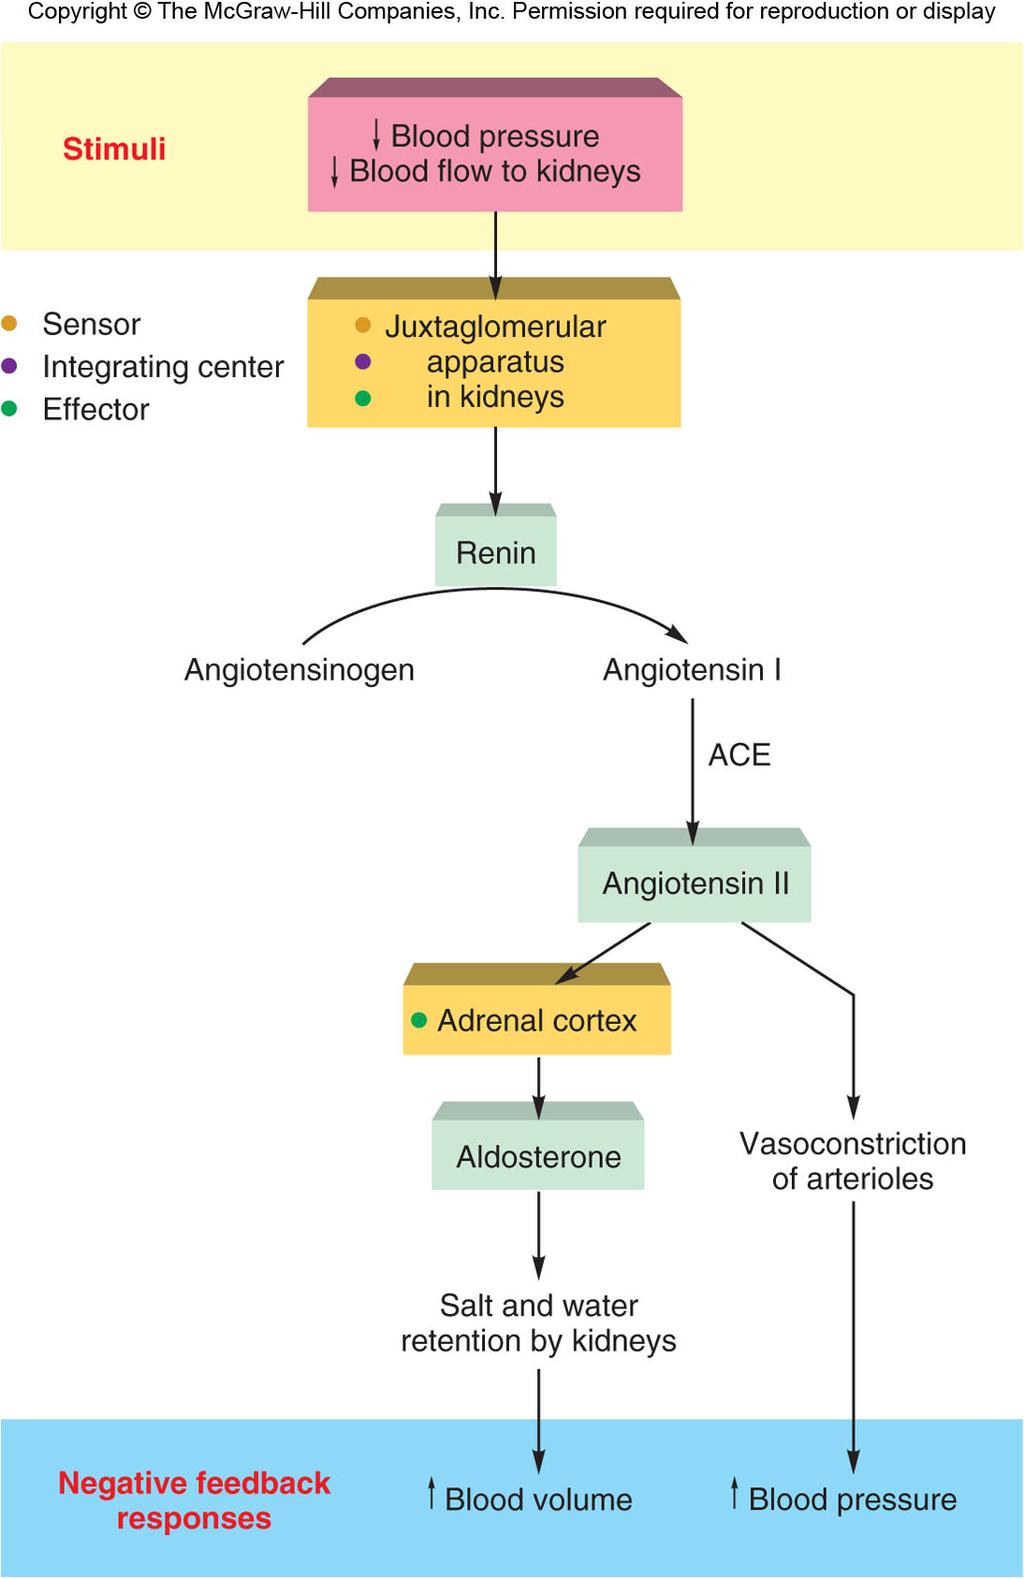 Angiotensin I is converted to angiotensin II by ACE enzyme.